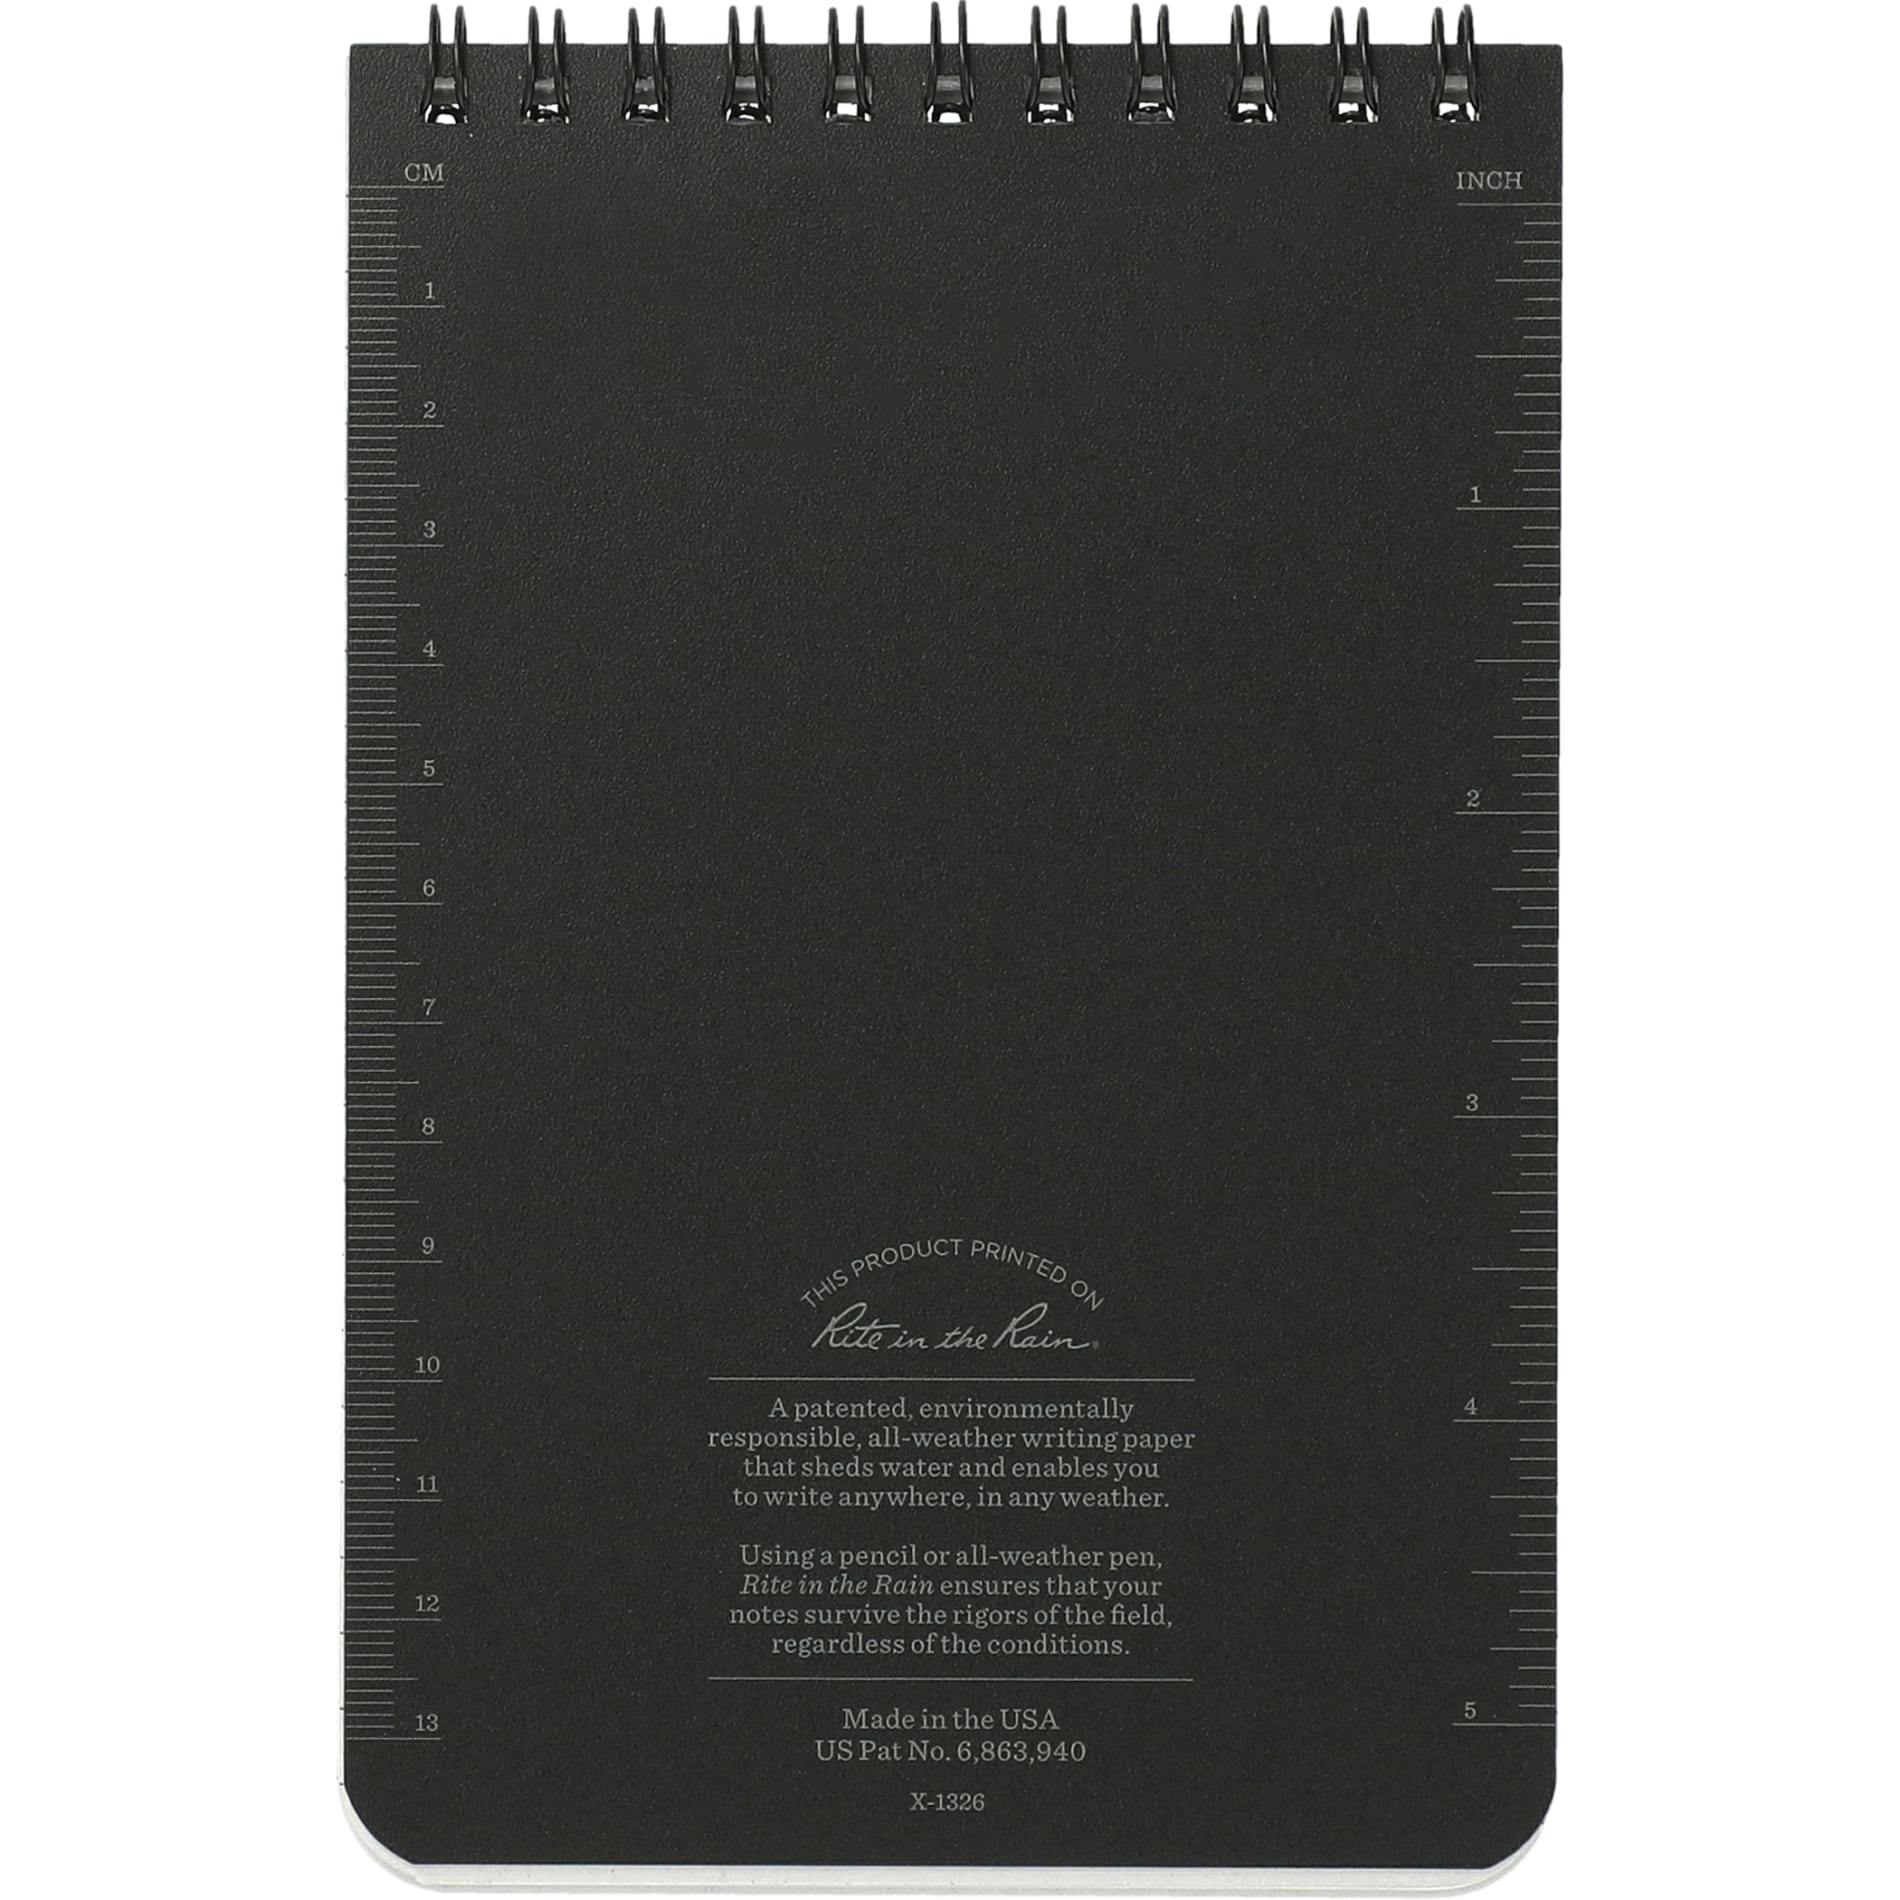 4” x 6” Rite in the Rain Top Spiral Notebook - additional Image 5